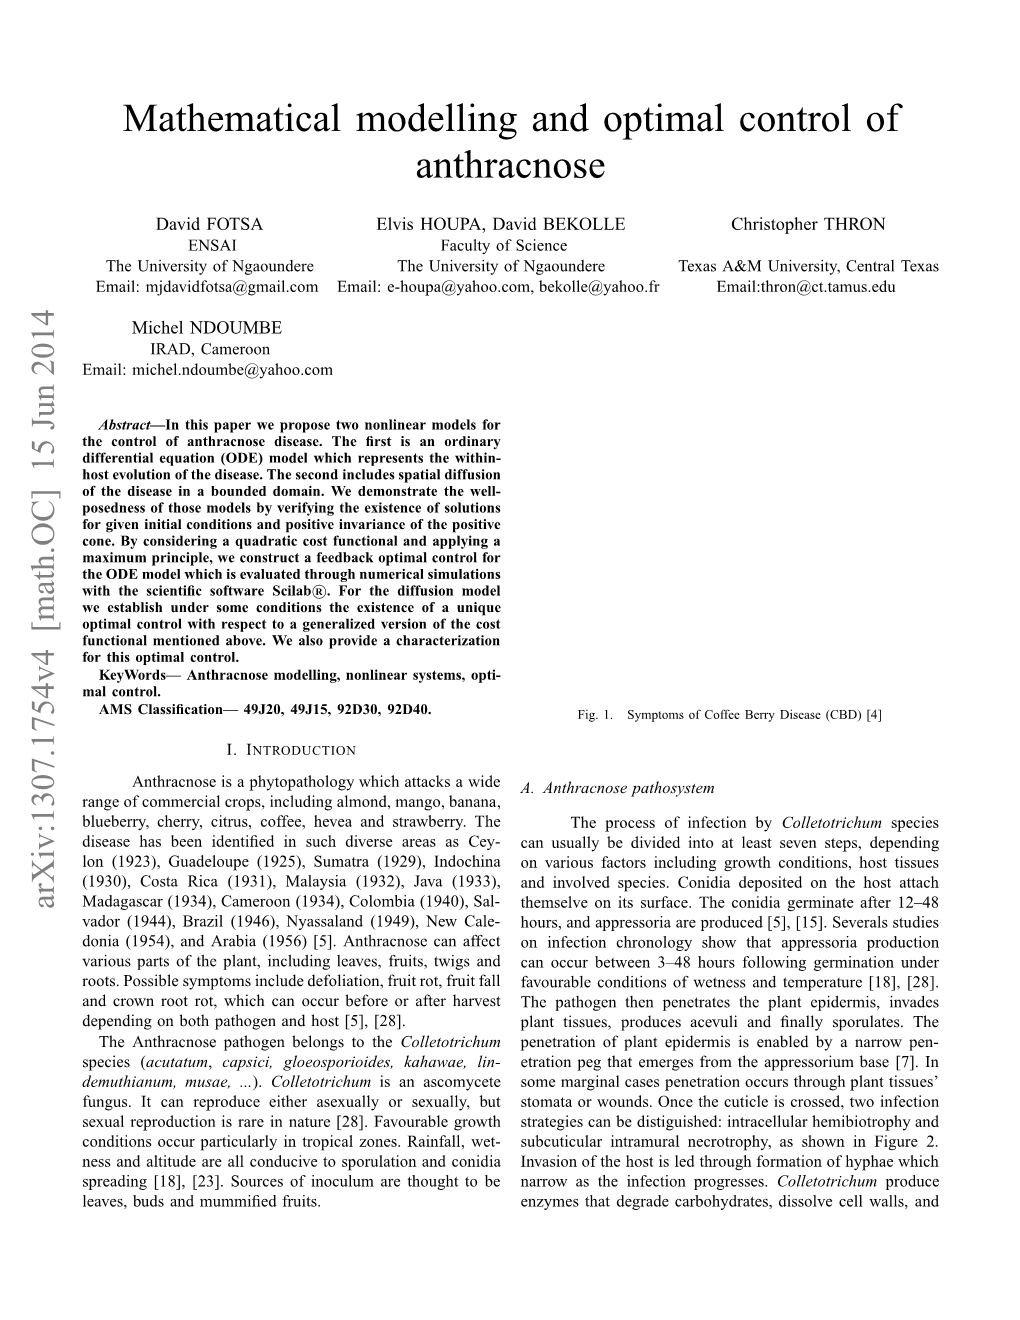 Mathematical Modelling and Optimal Control of Anthracnose